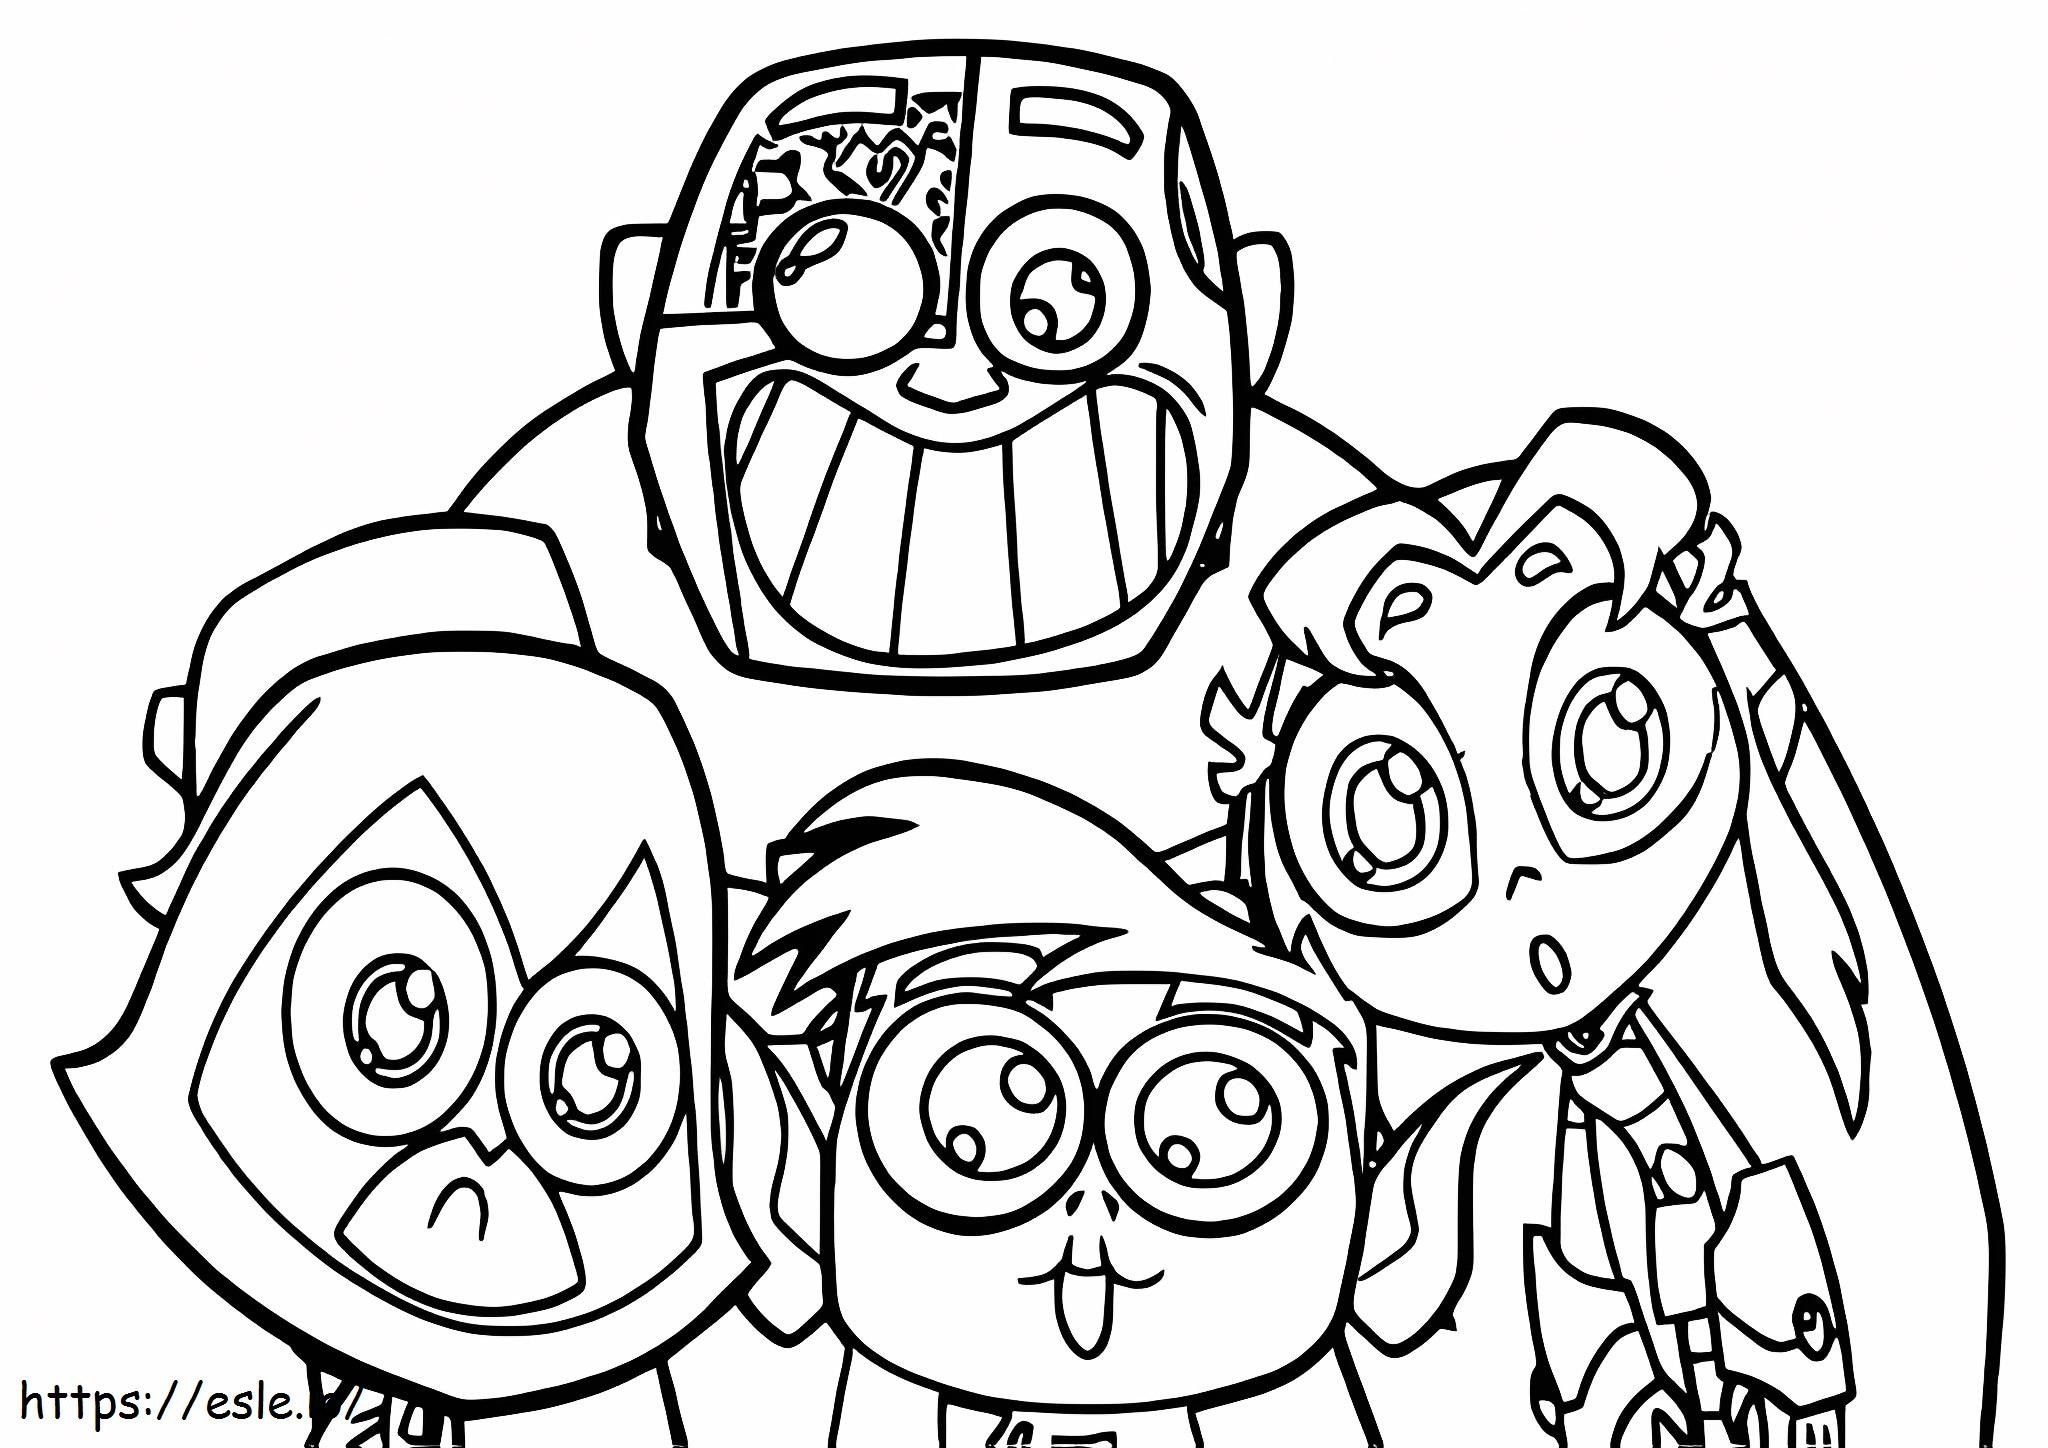 Cyborg And Stupid Friend coloring page